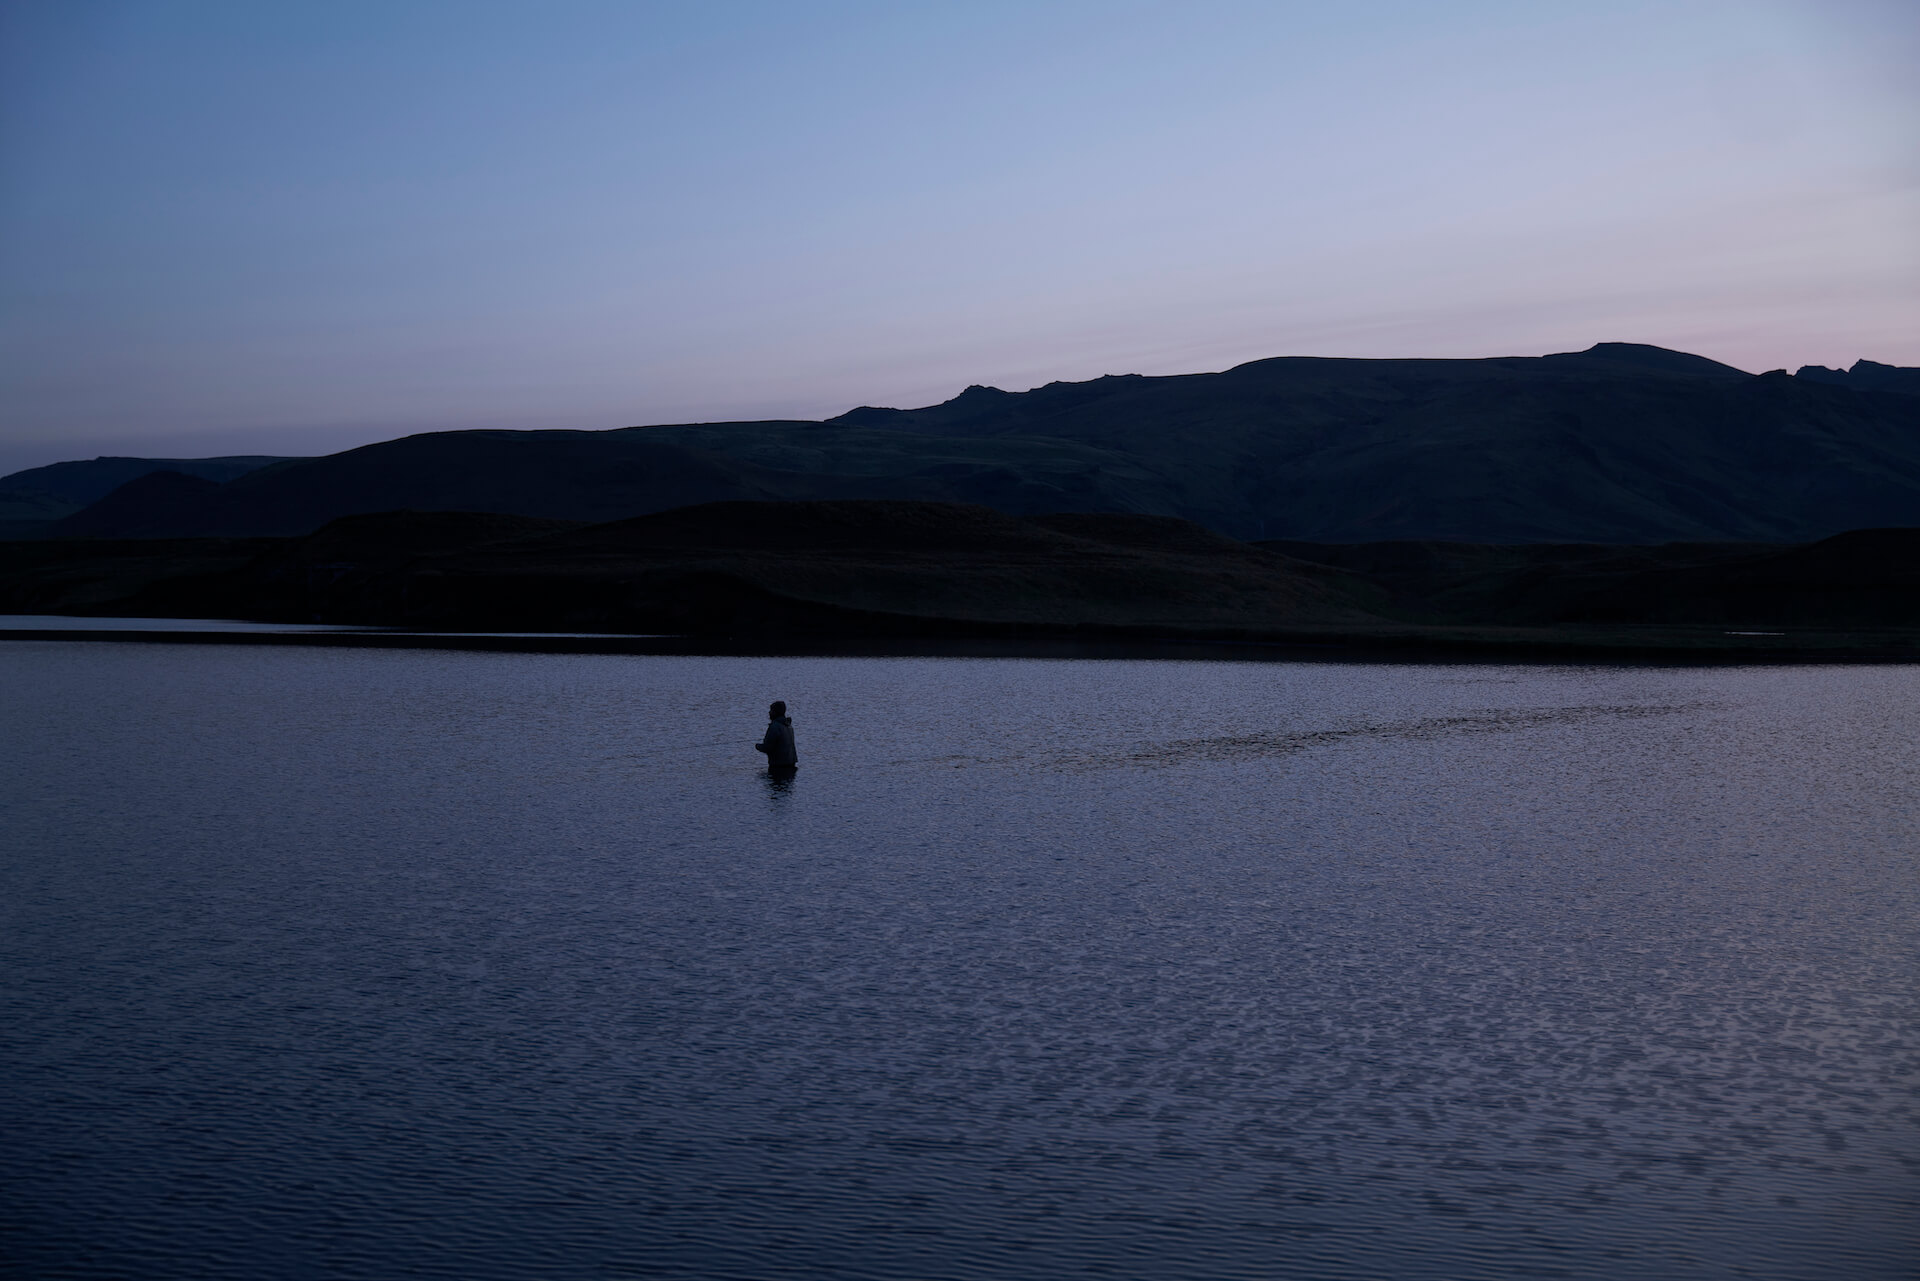 Fishing the lake at Heidarvatn, Iceland on a late evening